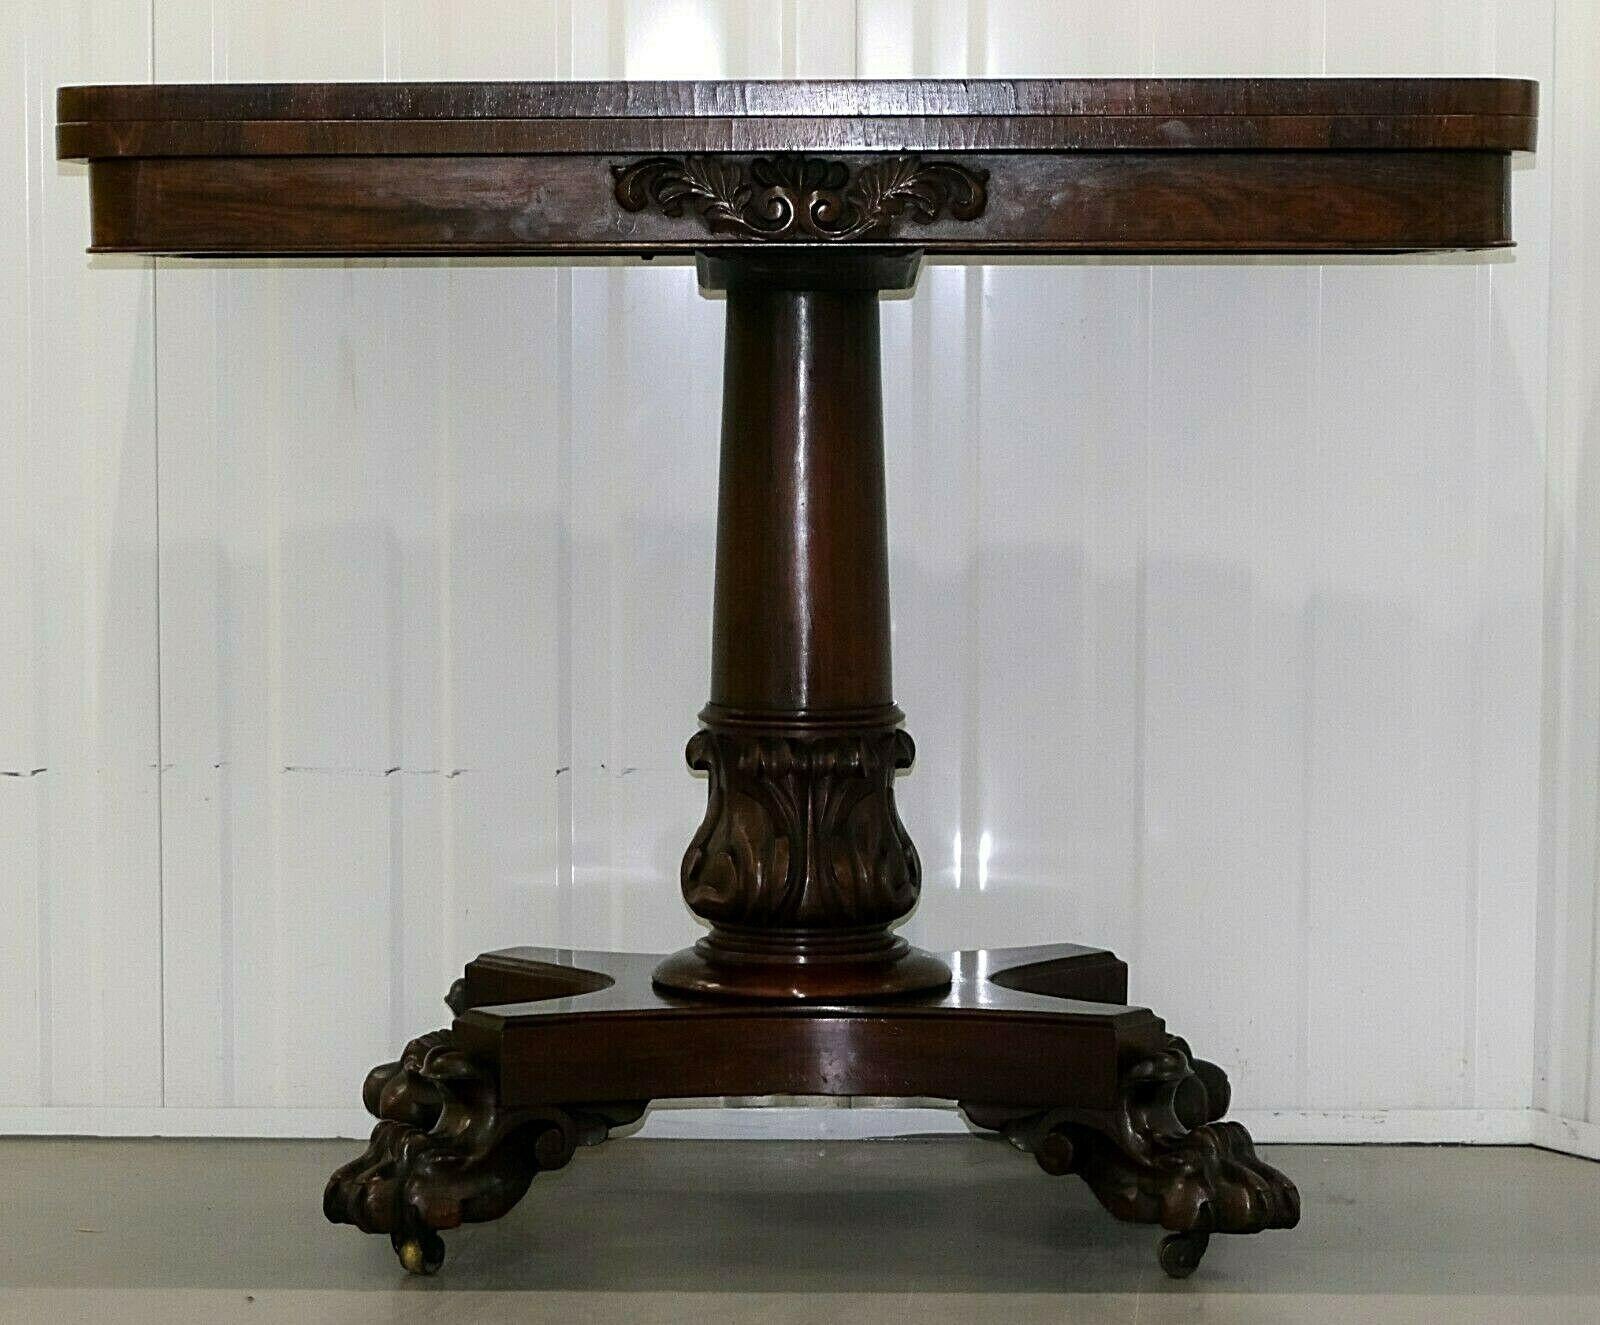 We are delighted to offer for sale this stunning Regency hardwood 19th century card table.

Twist and lift the top to reveal a blue lined round surface. The table is standing on beautiful paw feet that have casters underneath. The item is in good